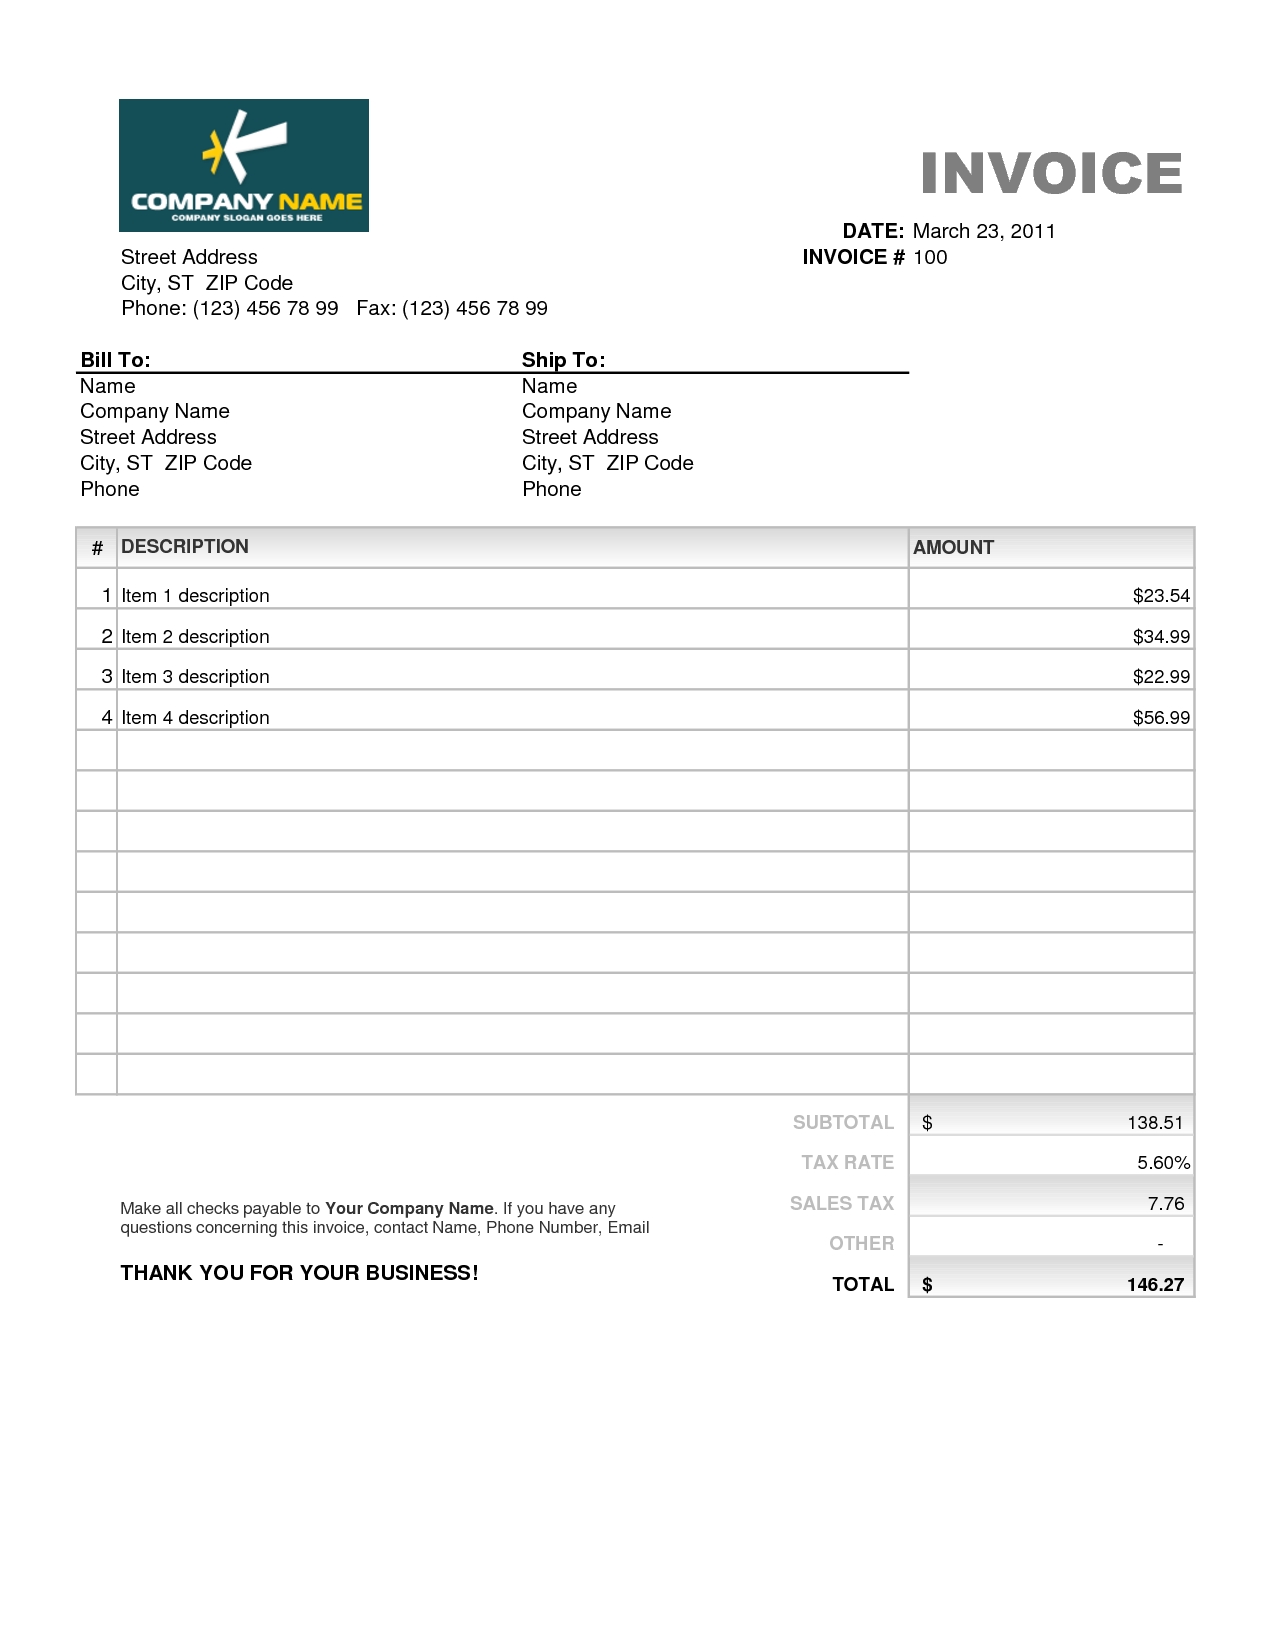 download invoice free microsoft word thank you card template excel invoice templates free